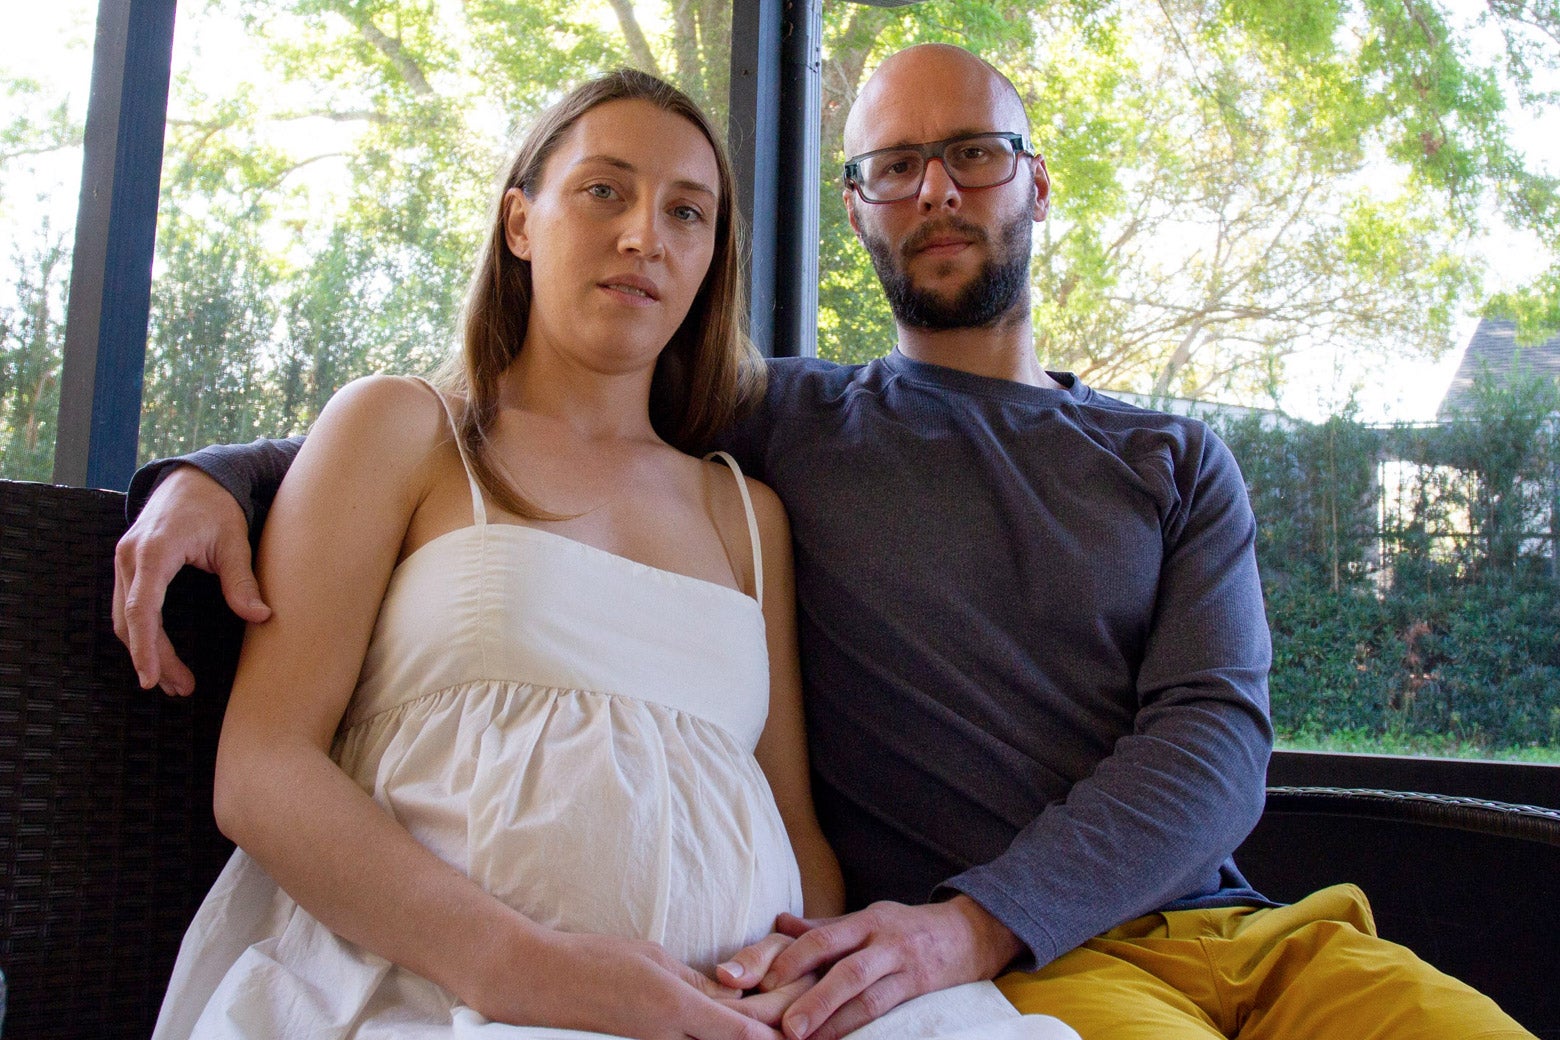 A pregnant woman wearing a white dress sitting next to her husband, wearing a beard, glasses, a black shirt, and yellow pants. Lee looks furious. Deborah looks resigned.